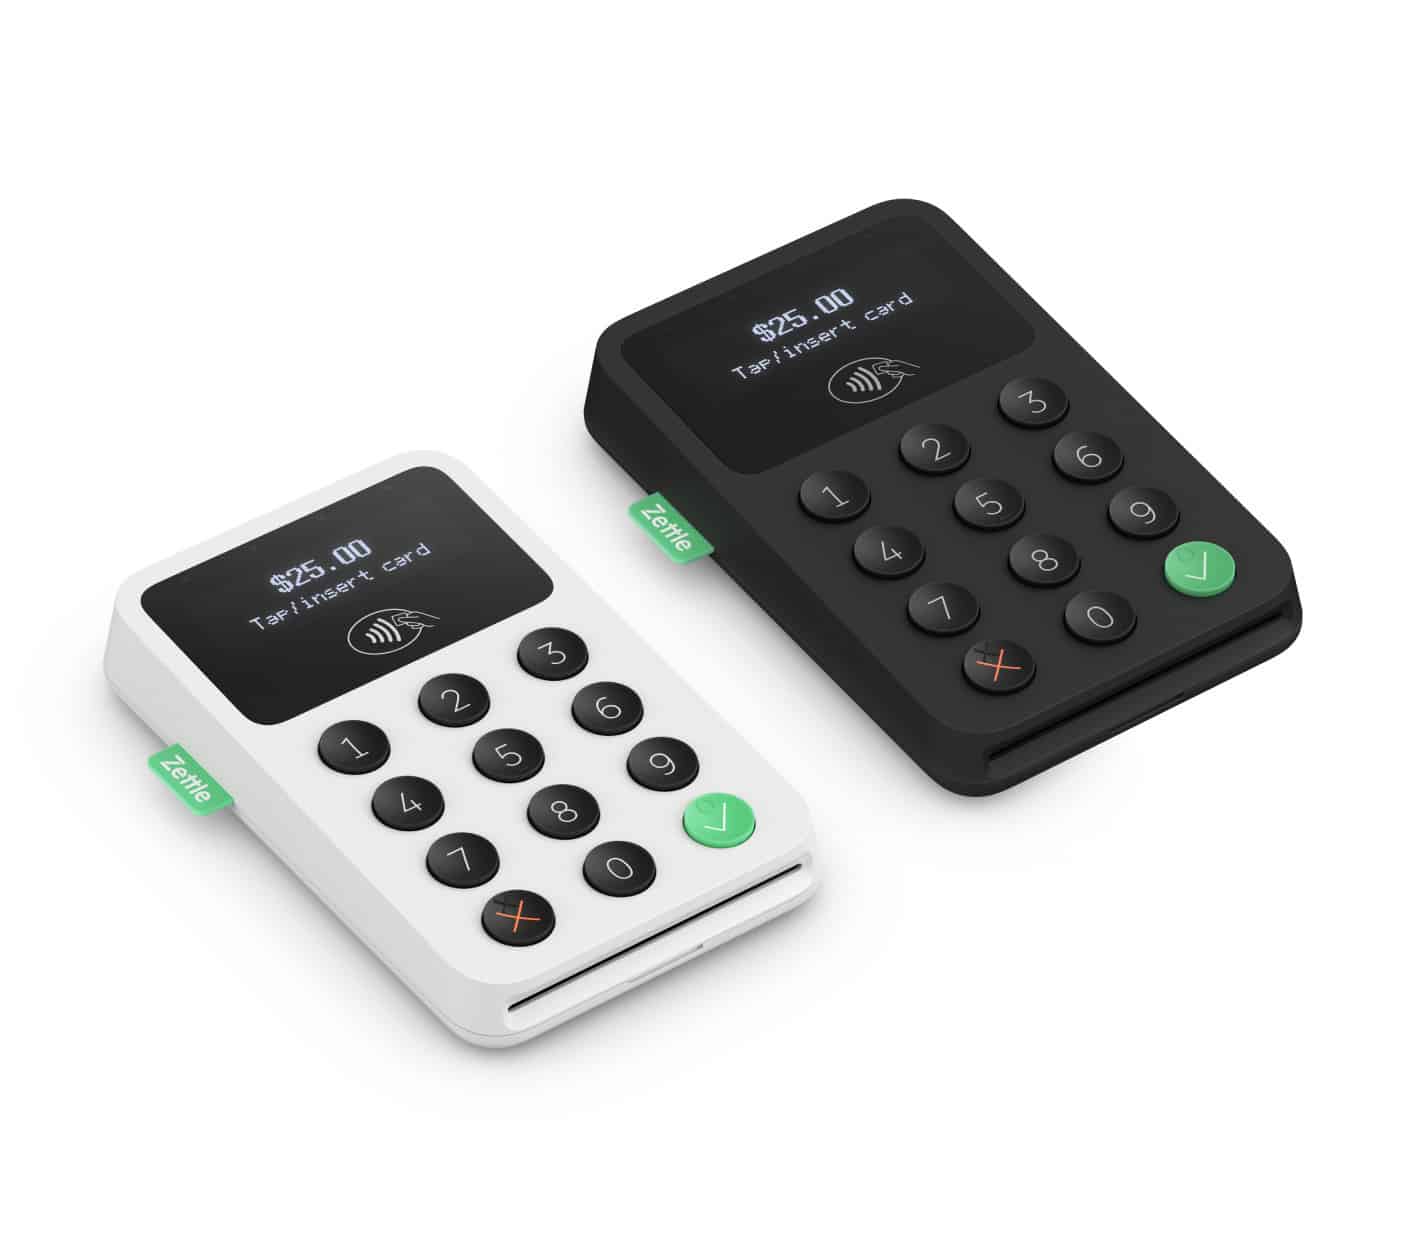 PayPal Zettle card readers